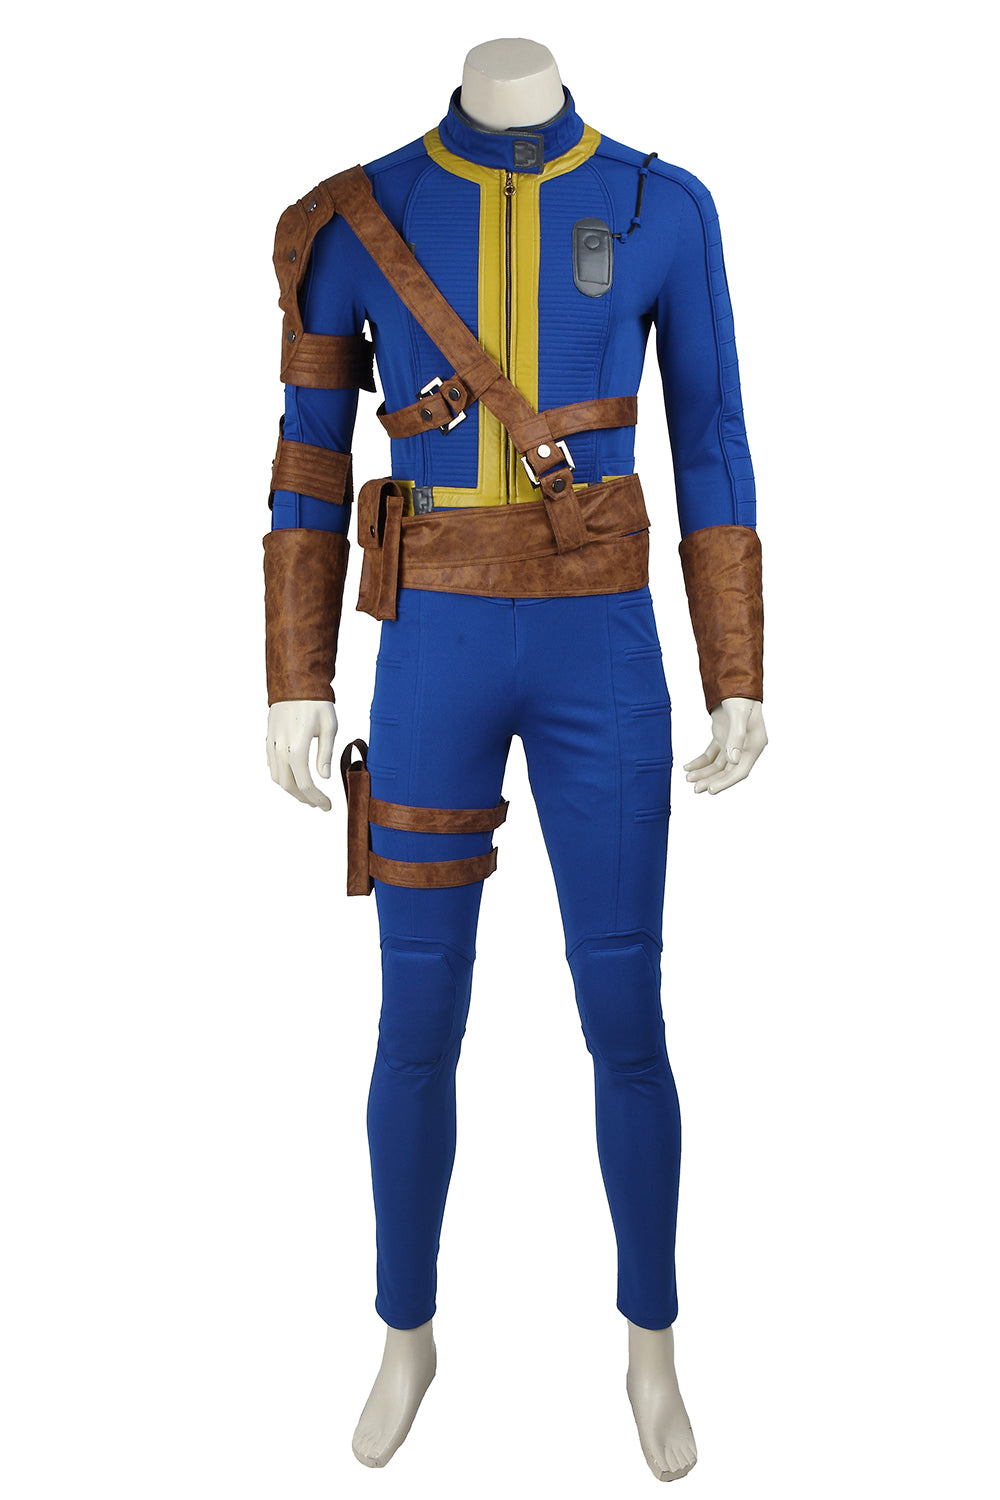 fallout 4  Vault111 cosplay costume outfit Uniform